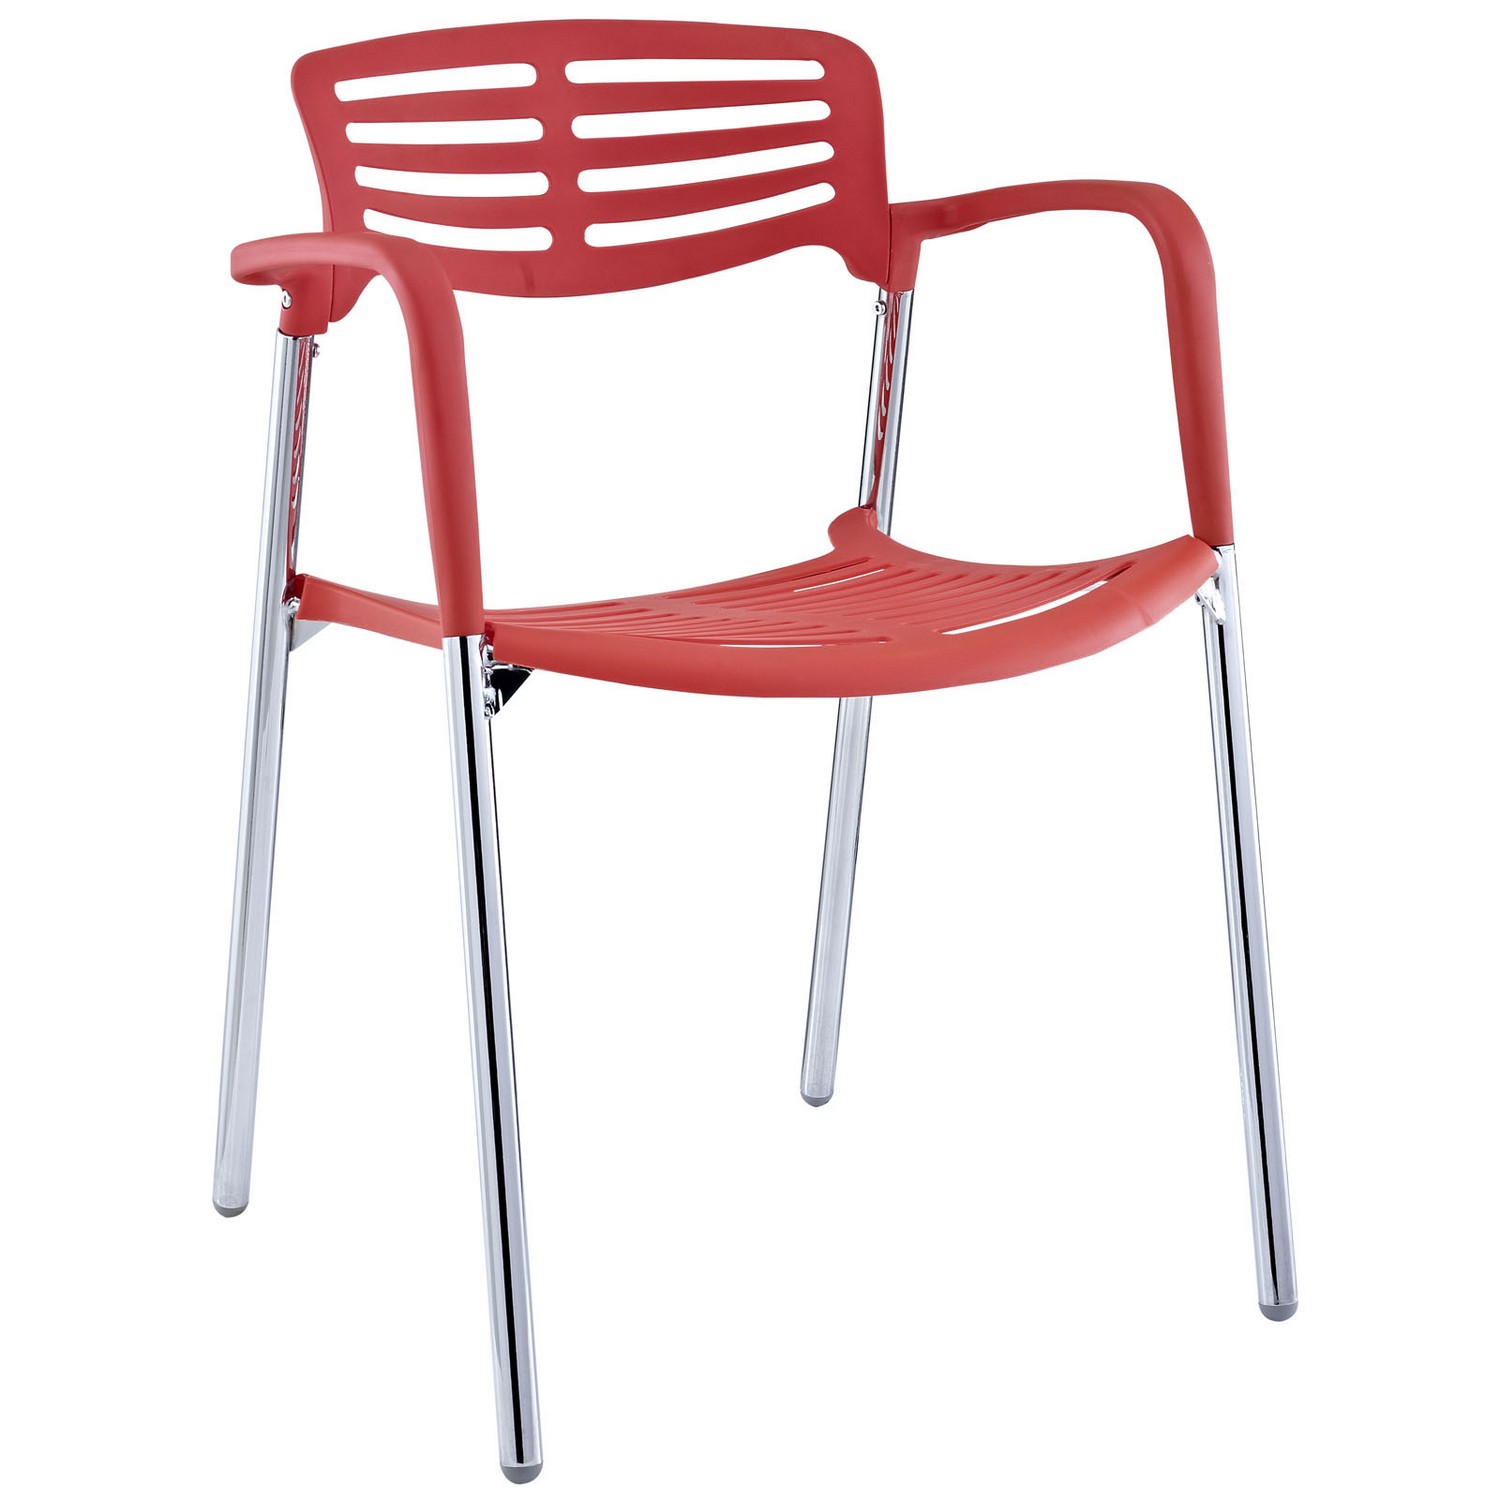 Modway Fleet Stacking Chair - Red